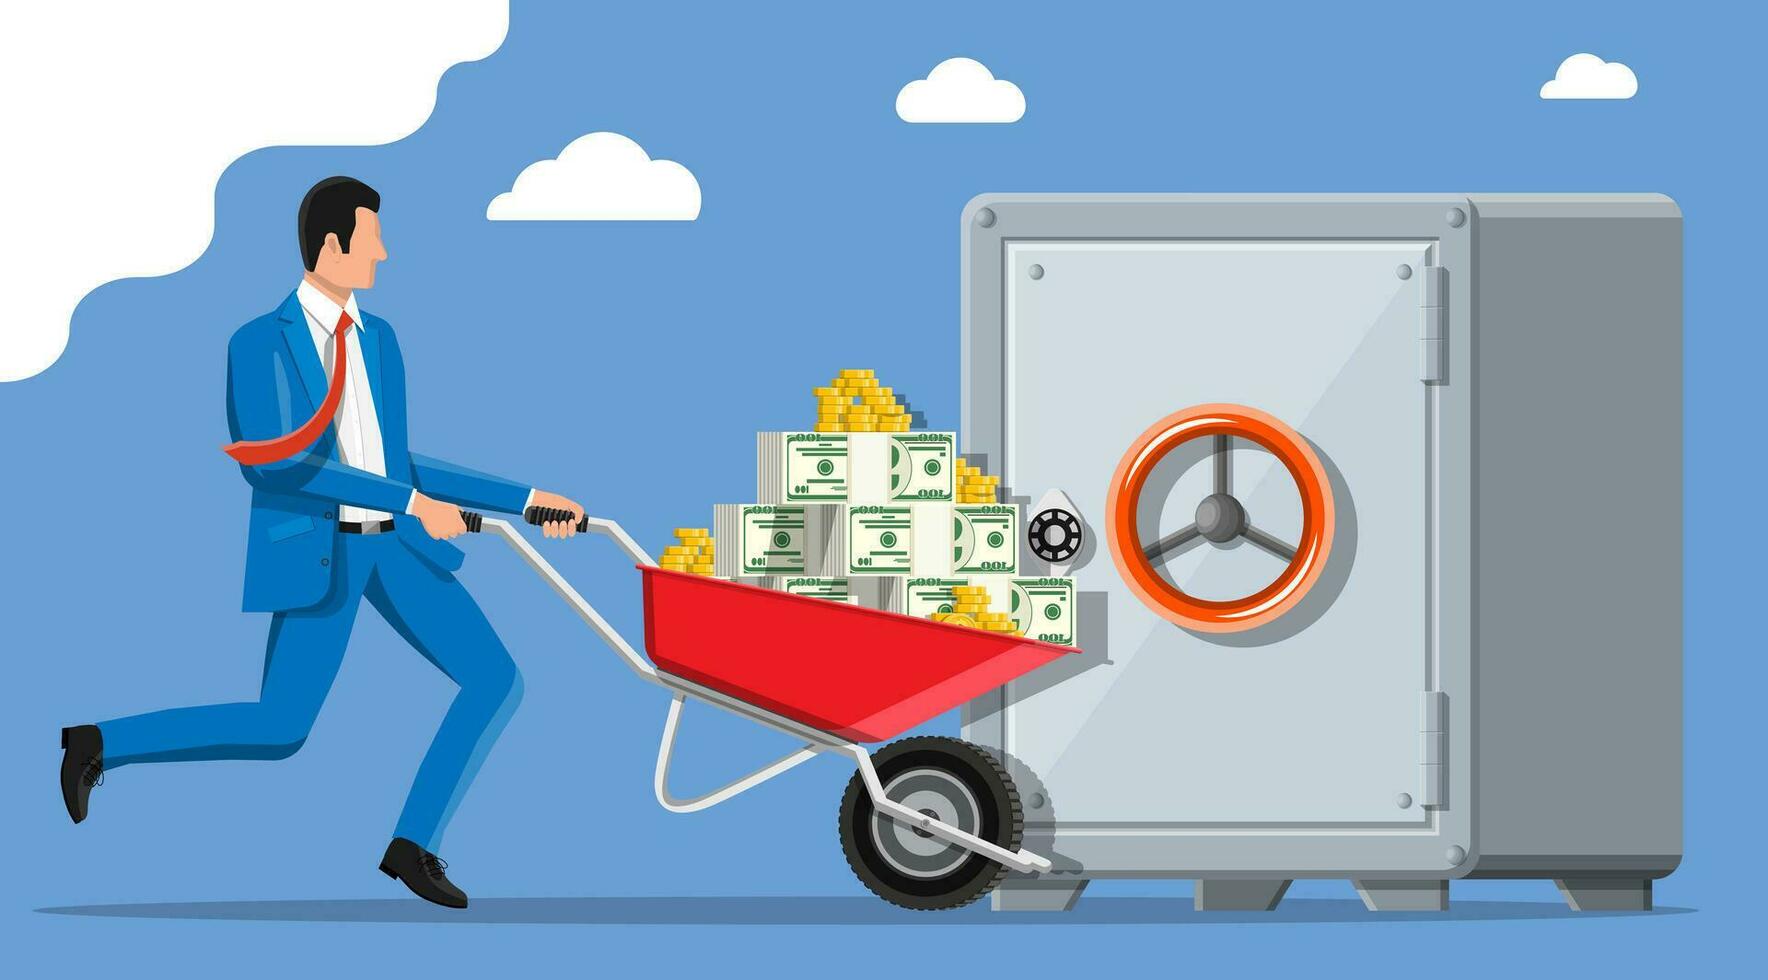 Rich businessman depositing his money in bank in safe. Wheelbarrow full of gold coins and dollar banknotes. Growth, income, savings, investment, wealth. Business success. Flat vector illustration